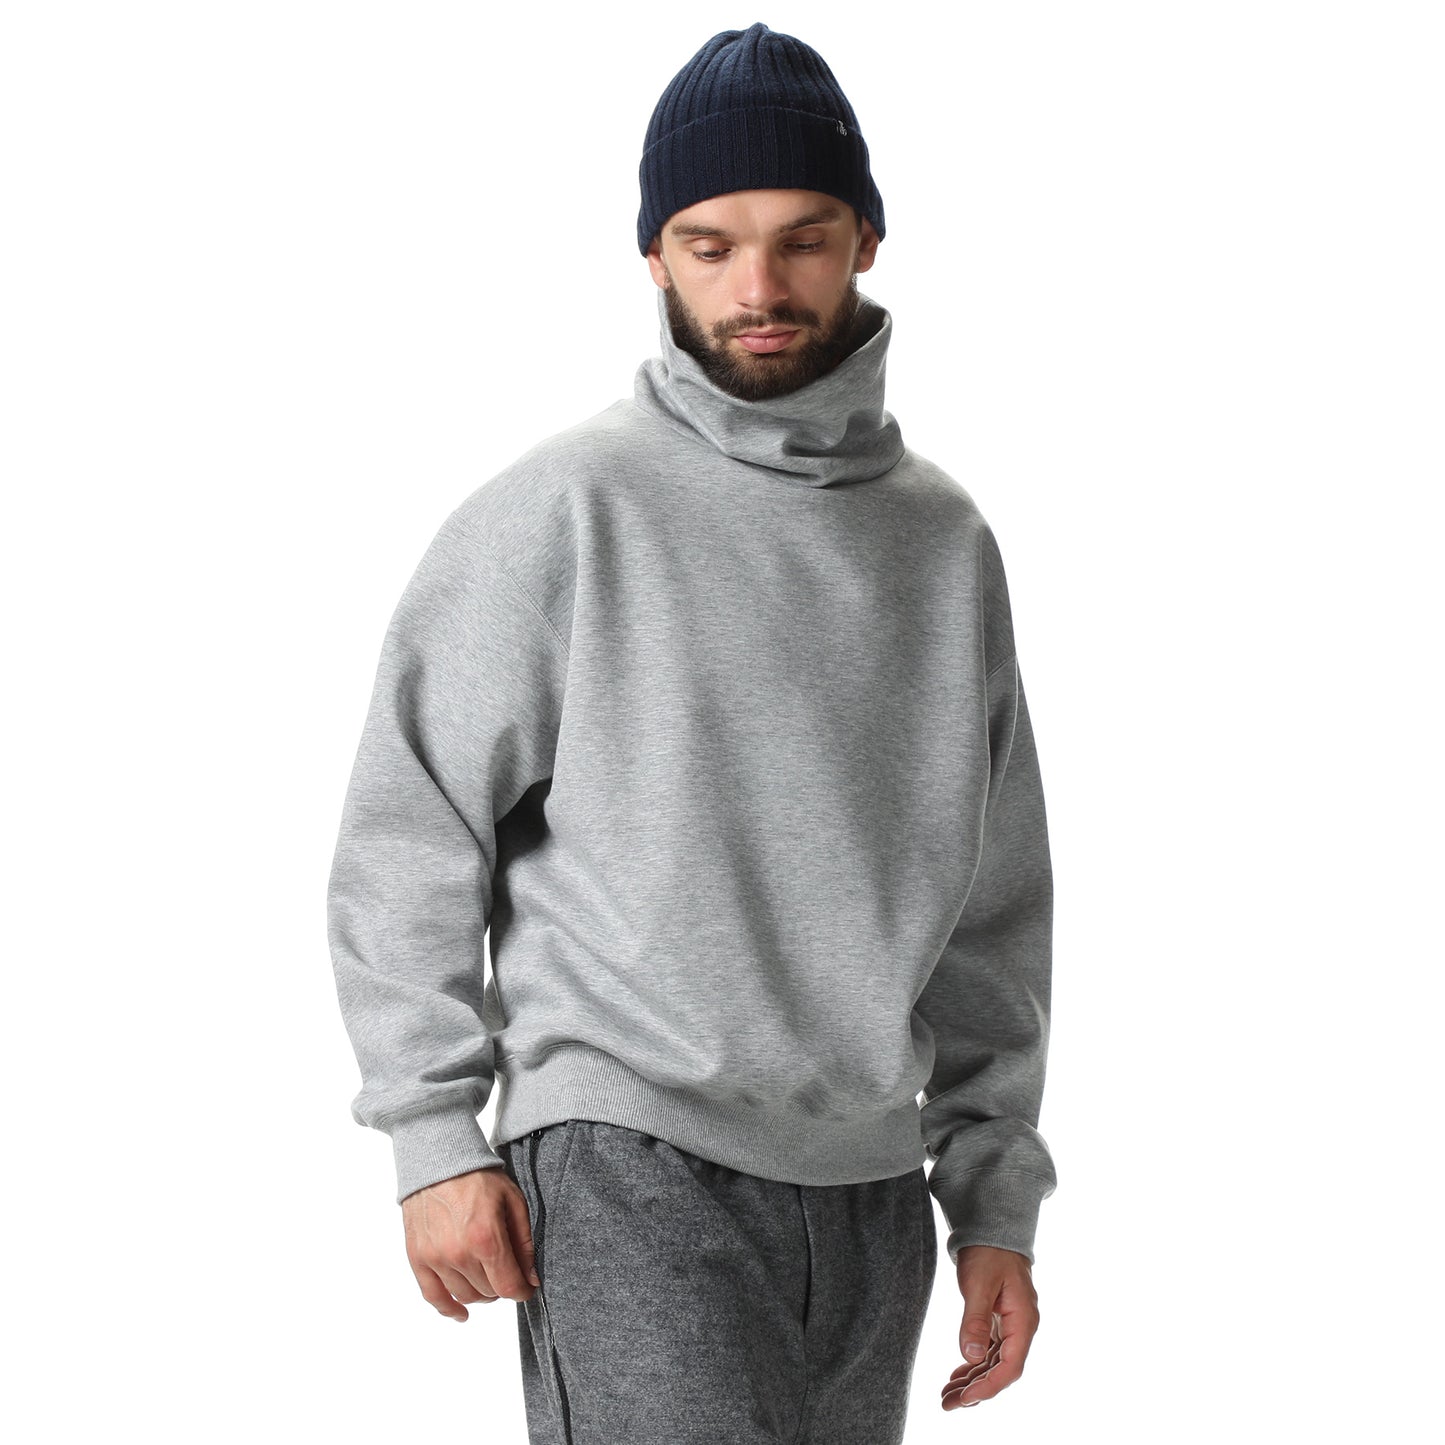 TECH KNIT WIDE TURTLE NECK PULLOVER GRAY